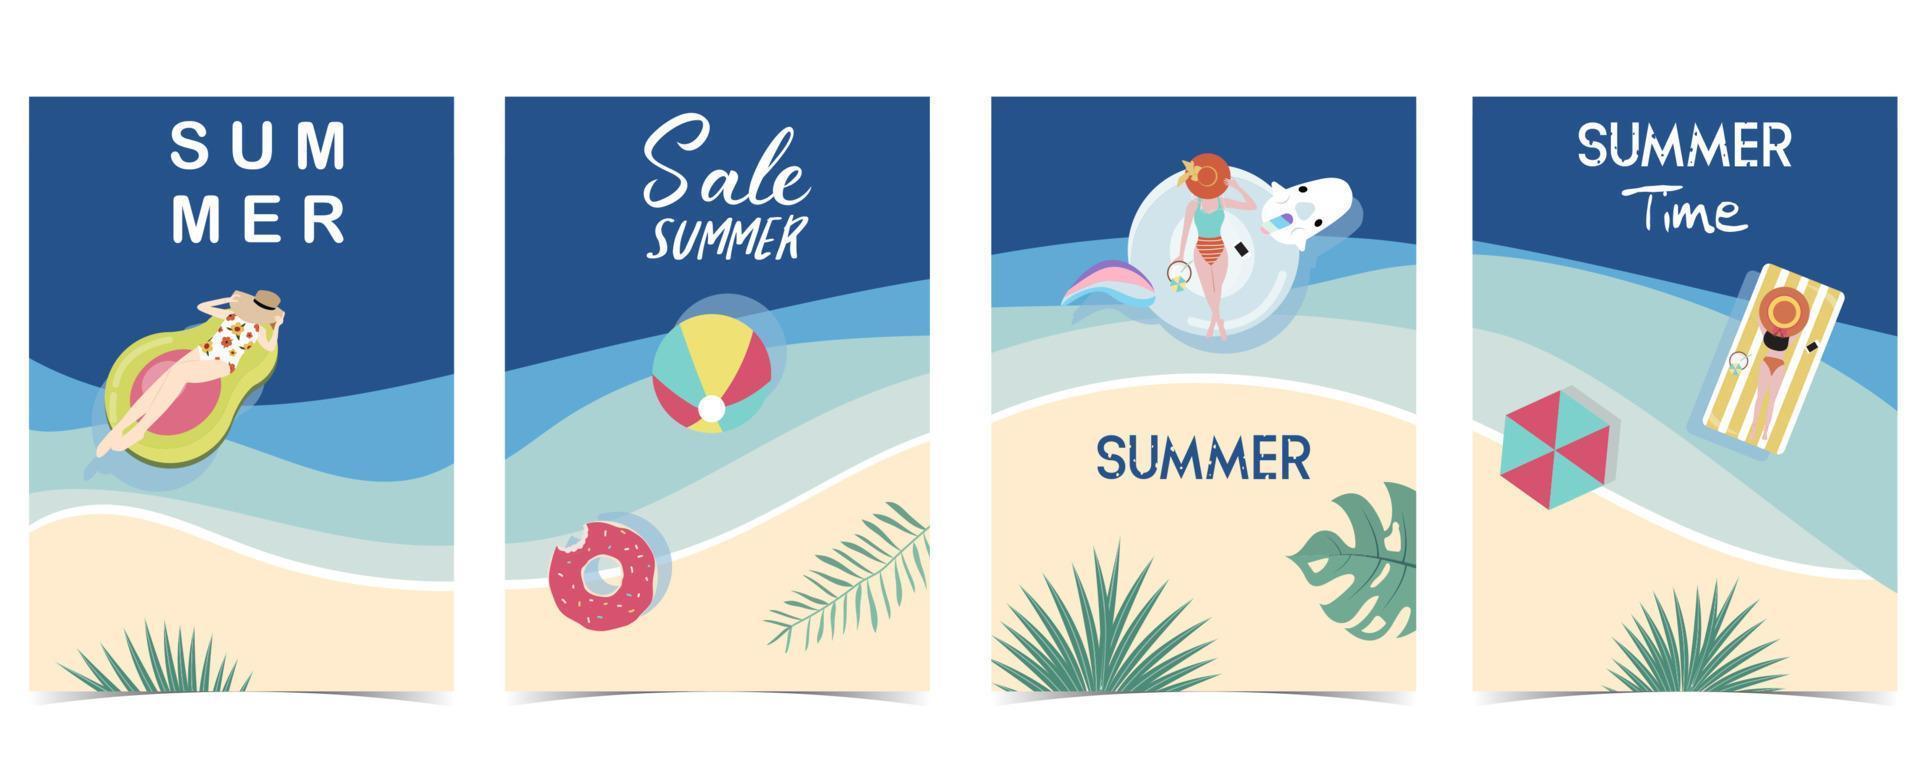 Party summer time postcard with pool and beach in the daytime background vector